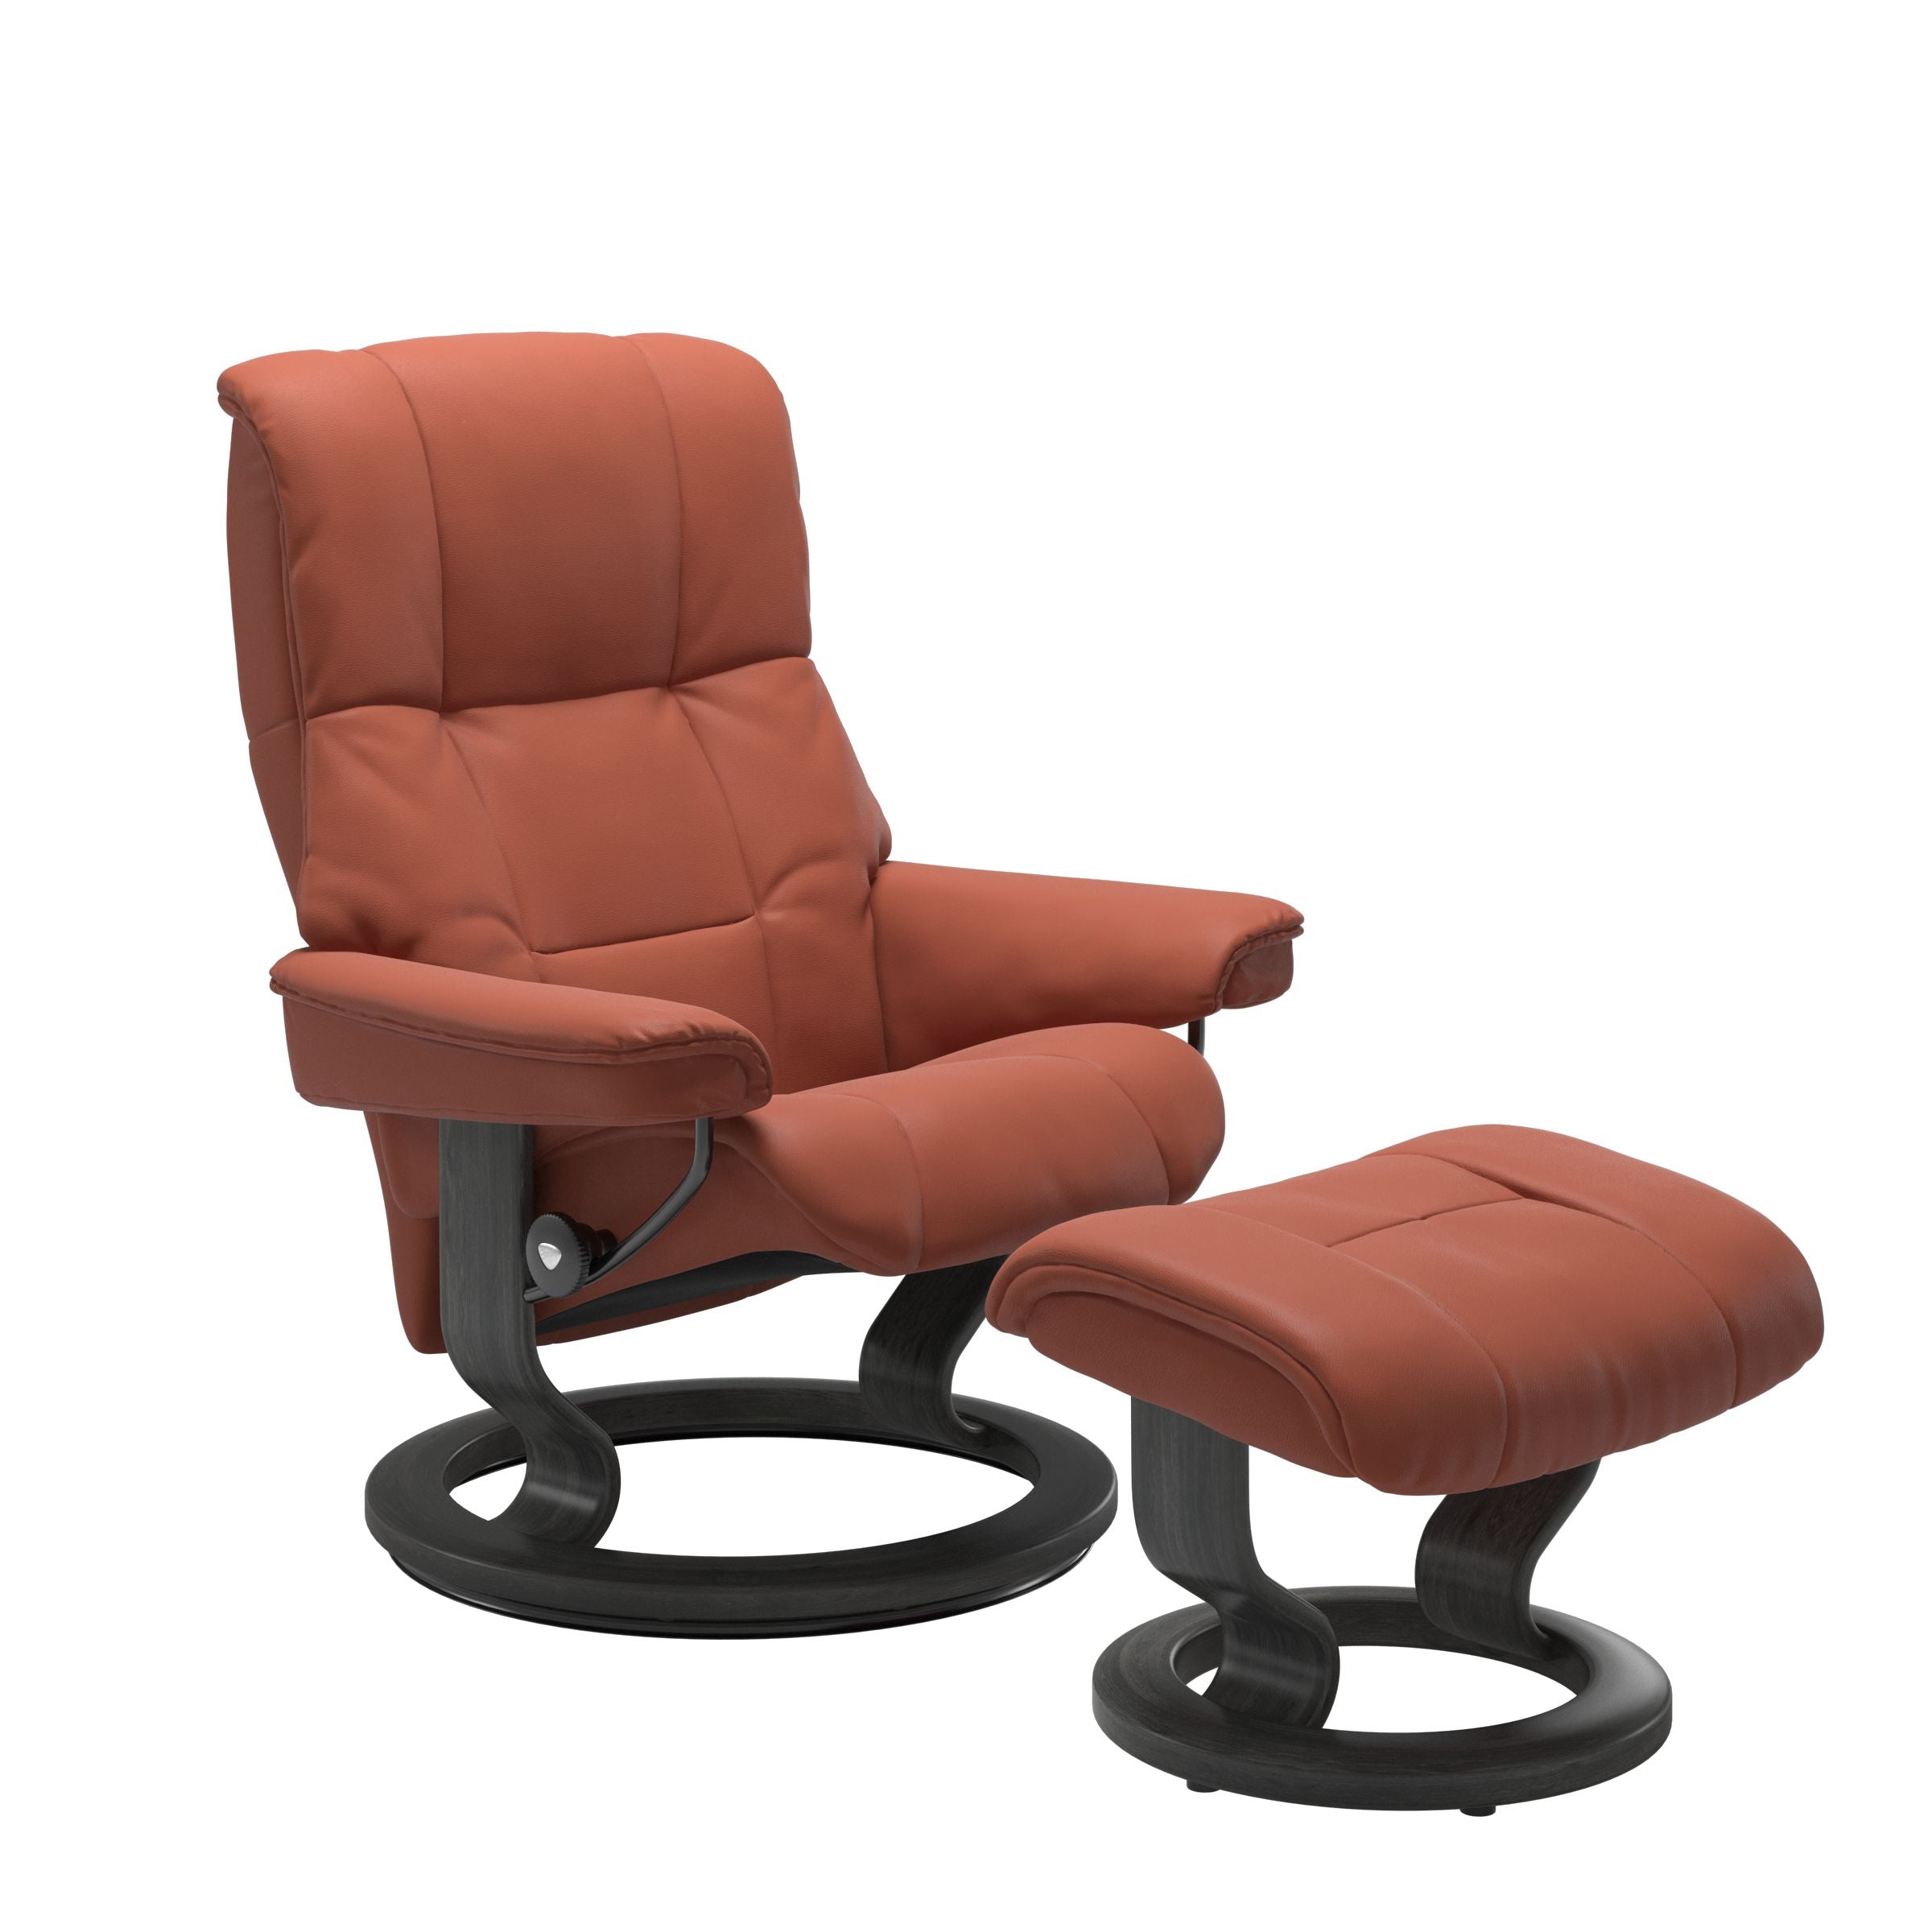 Stressless Mayfair Medium Recliner and Ottoman with Classic Base